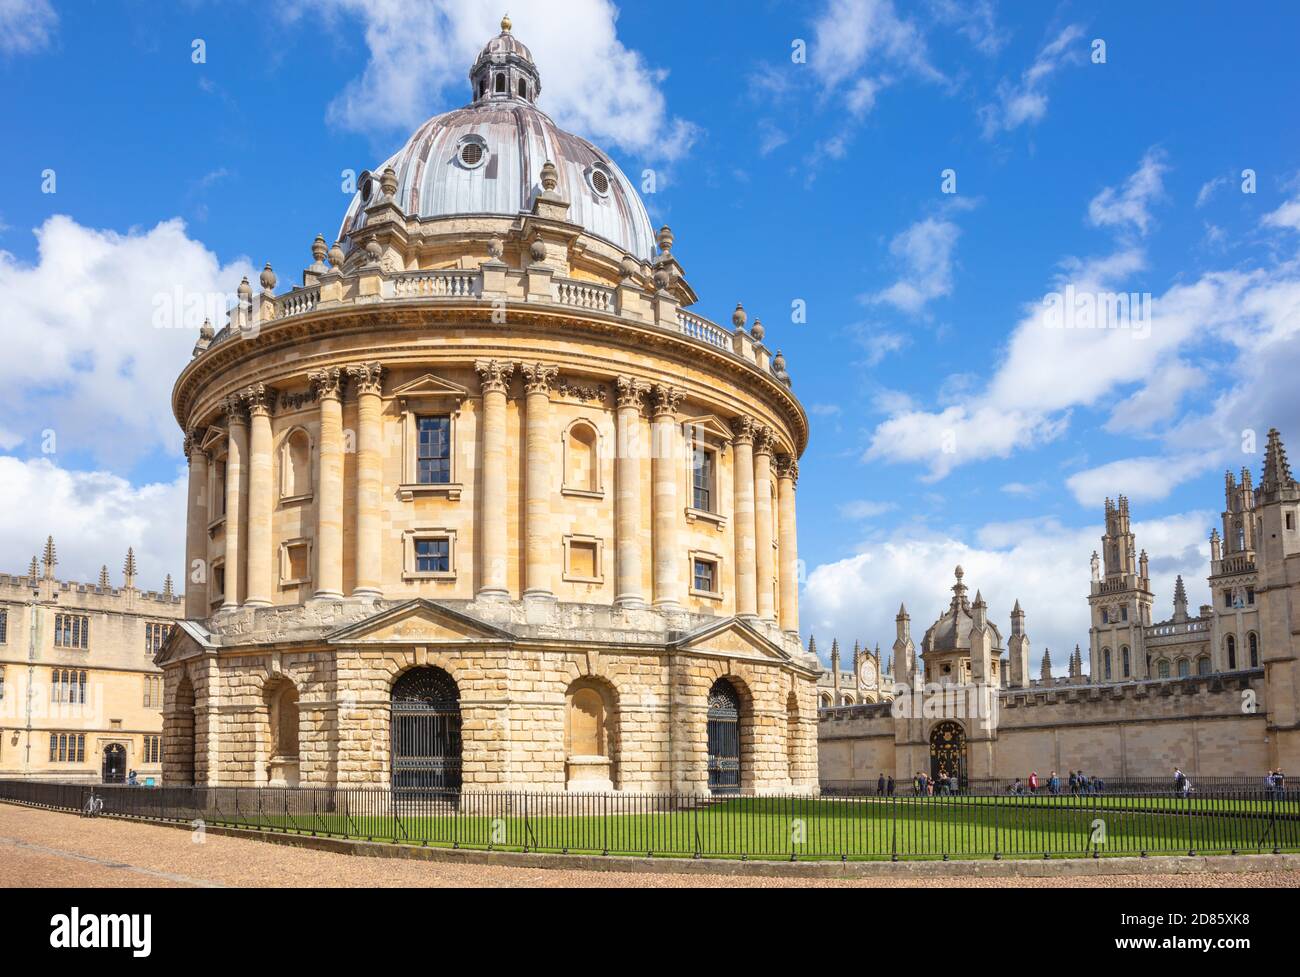 Oxford University Oxford Radcliffe caméra Oxford Oxfordshire Angleterre GB Europe Banque D'Images